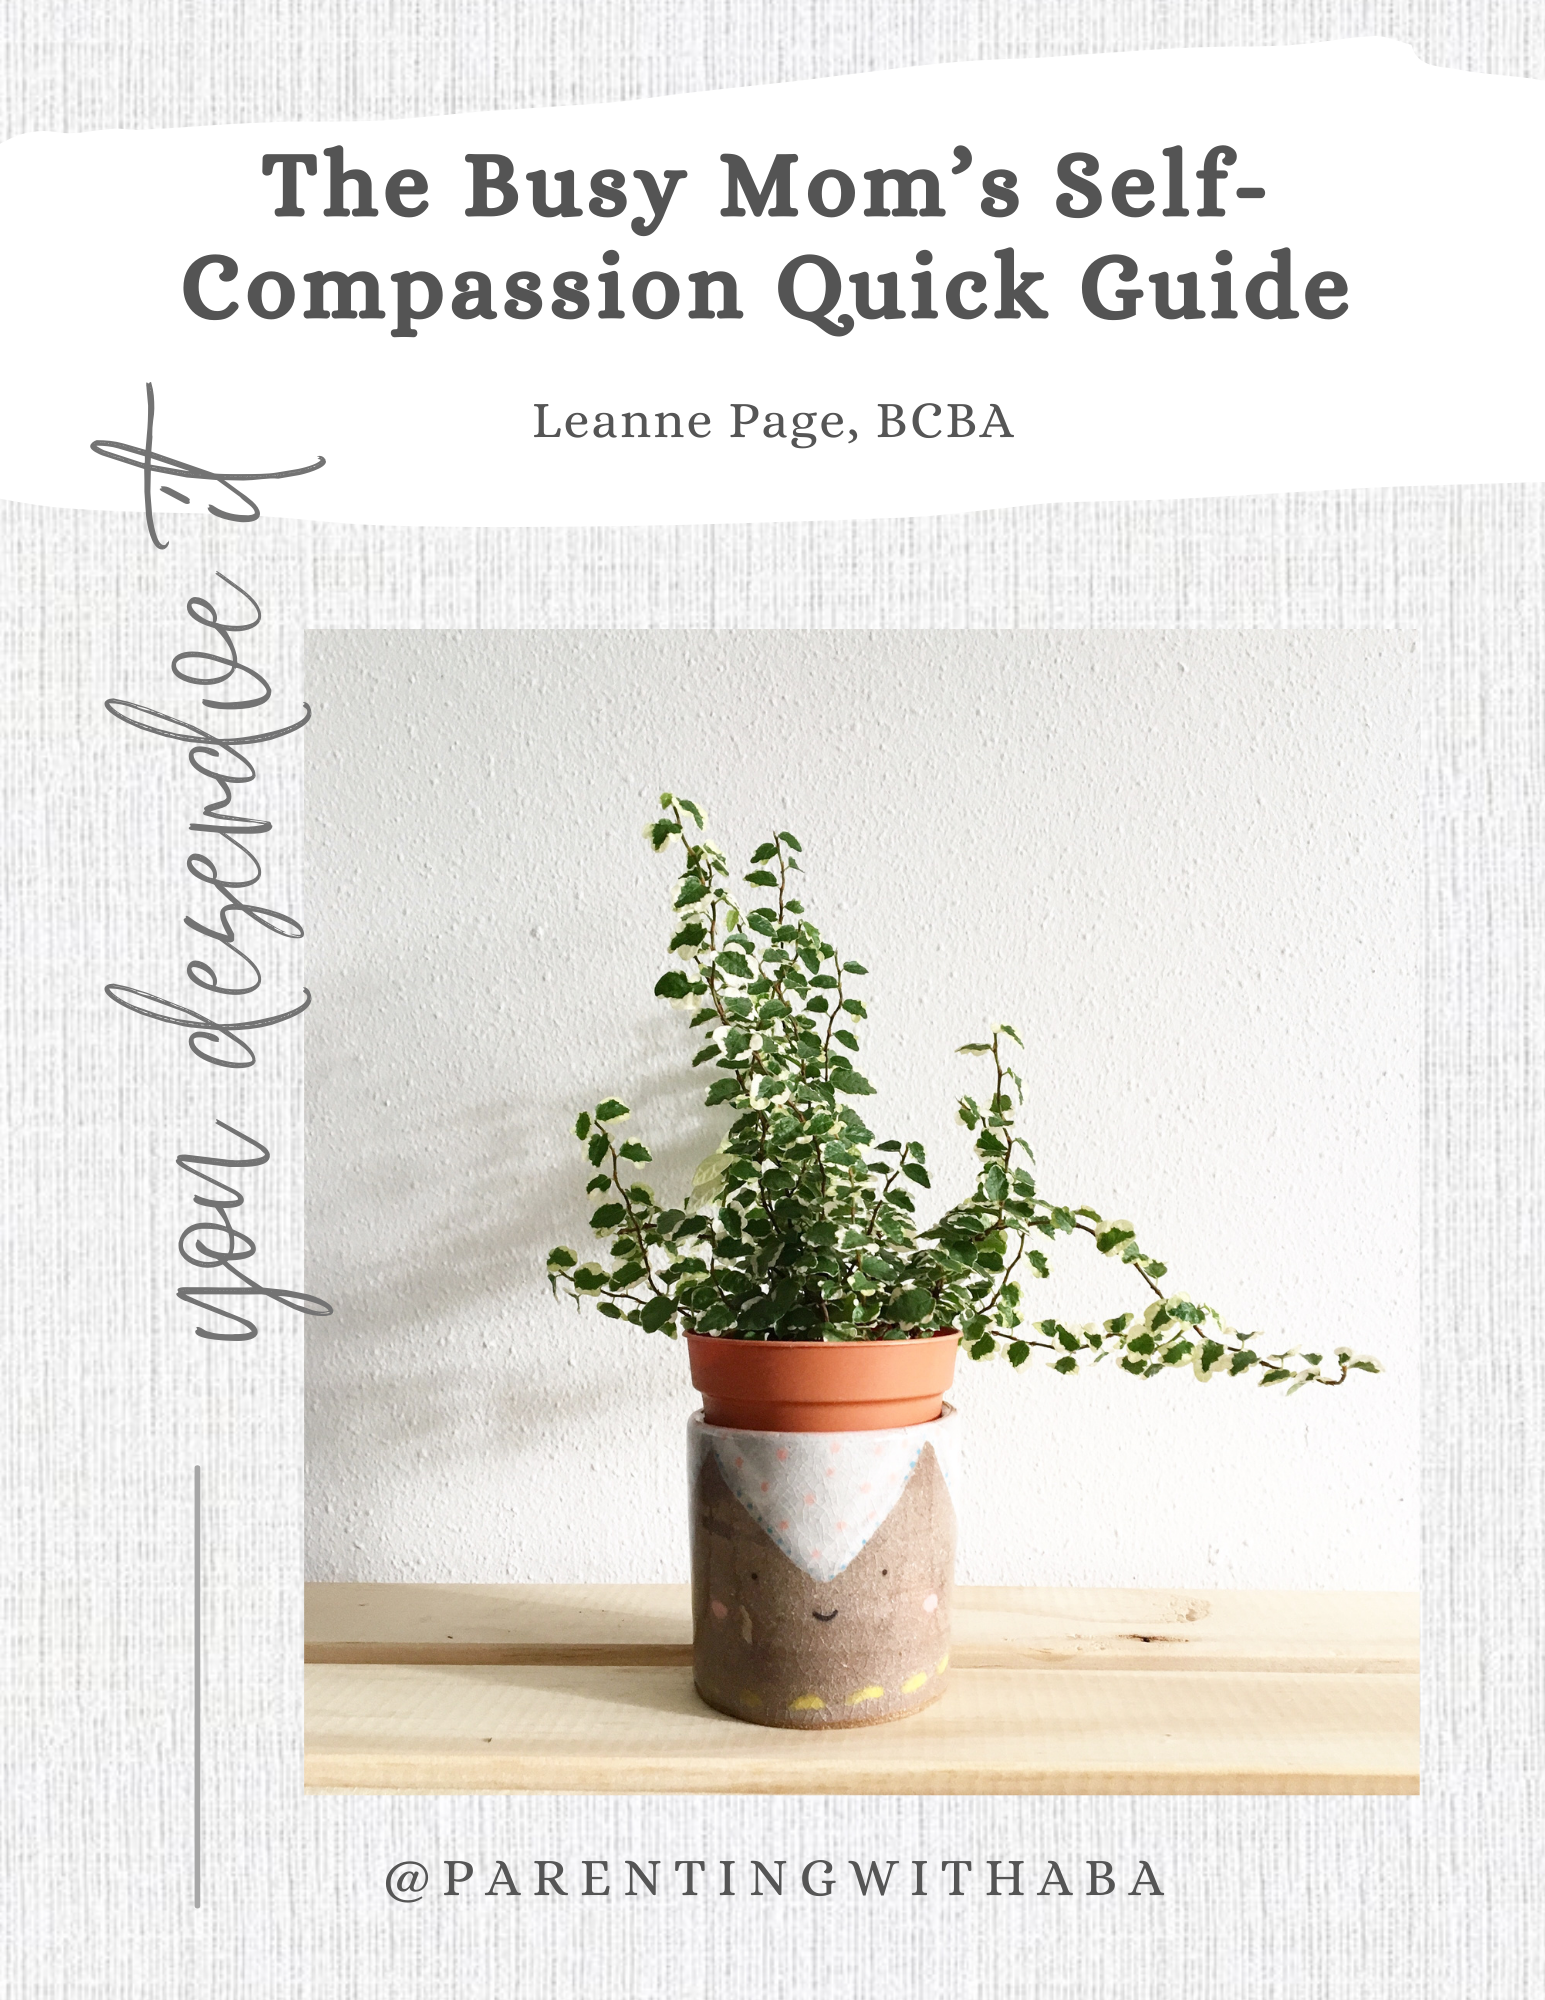 cover of the ebook with title "Busy Mom's Self-Compassion Quick Guide"